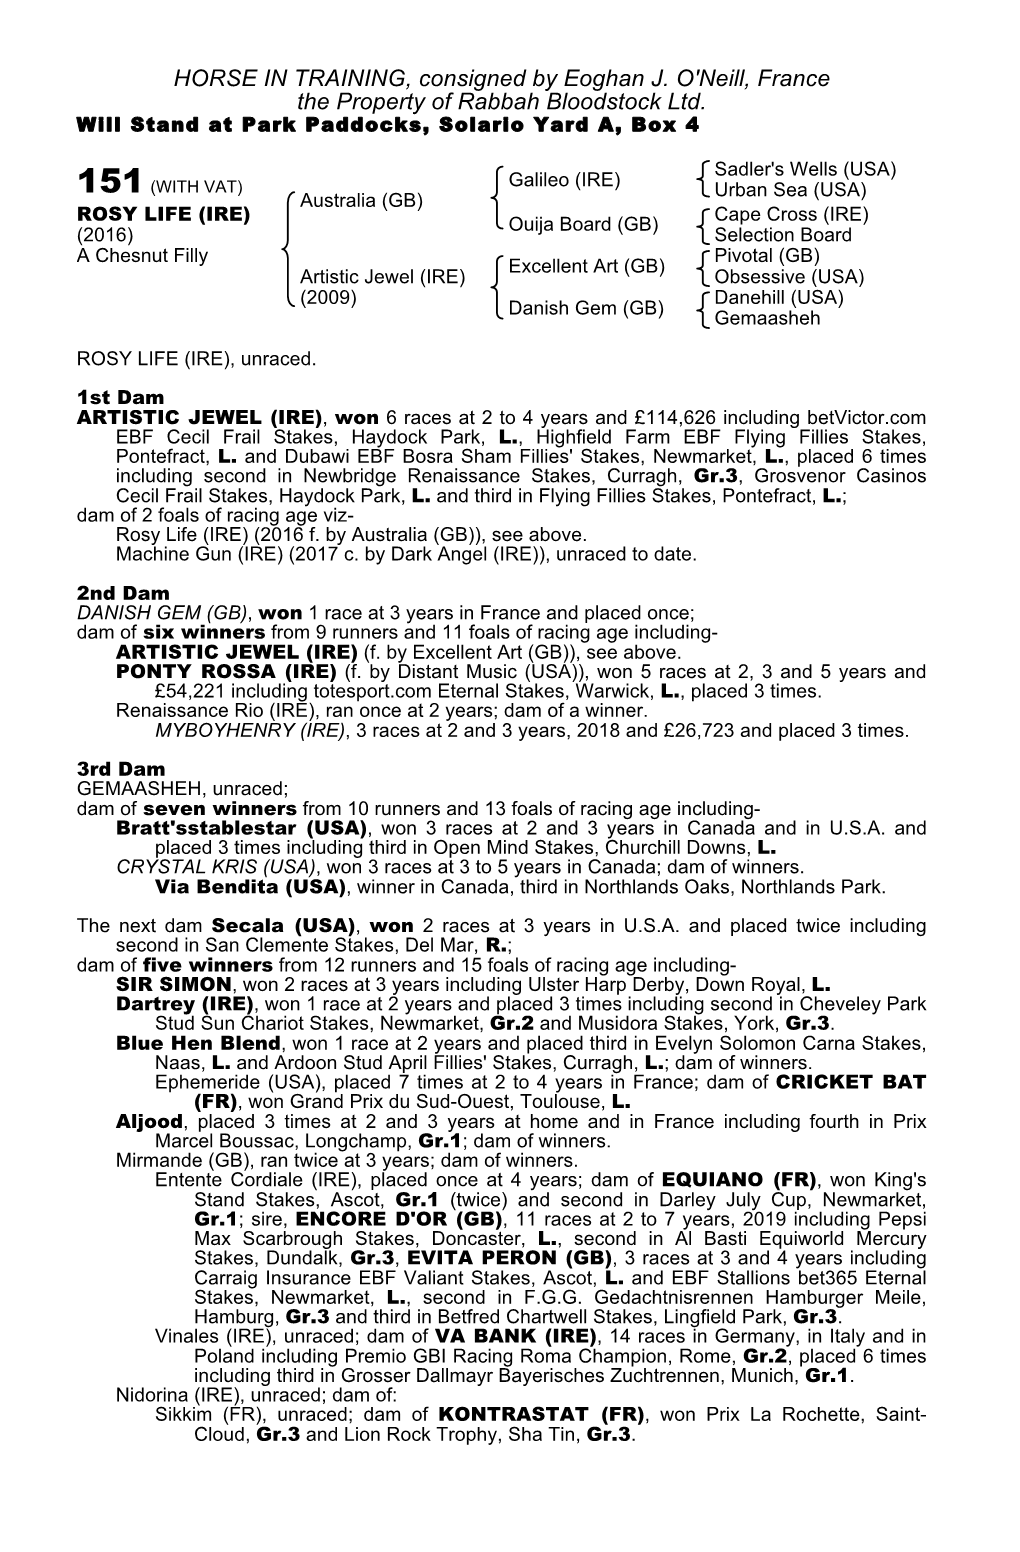 HORSE in TRAINING, Consigned by Eoghan J. O'neill, France the Property of Rabbah Bloodstock Ltd